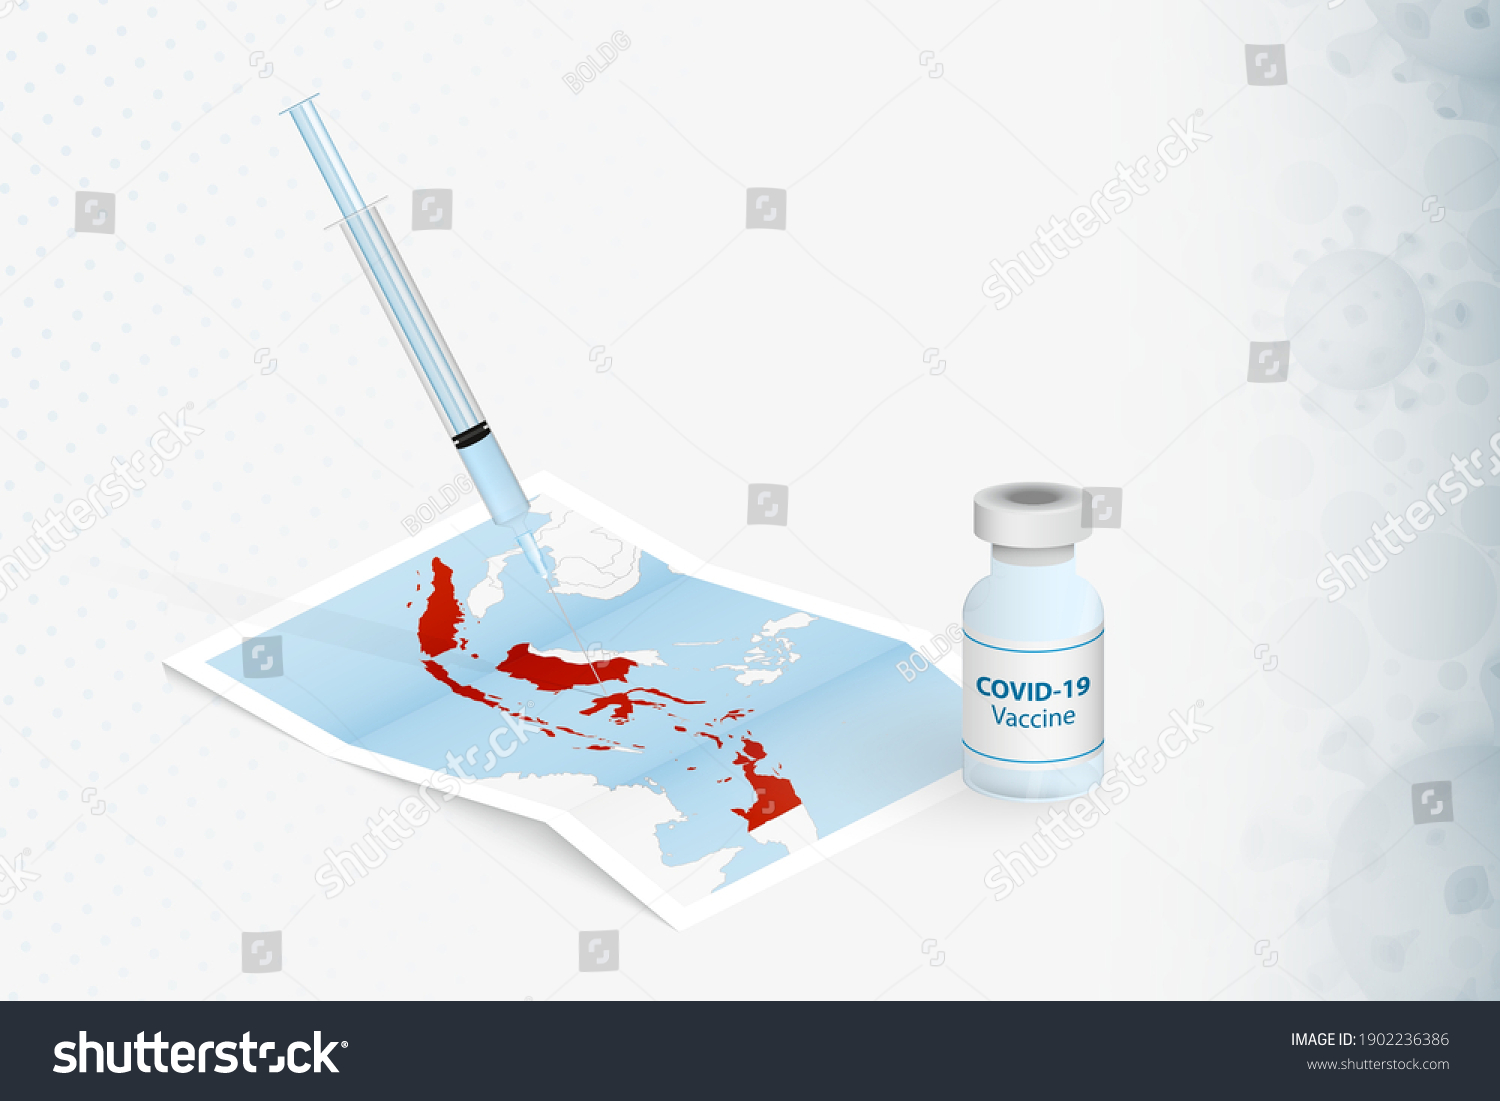 Indonesia Vaccination Injection Covid19 Vaccine Map Stock Vector